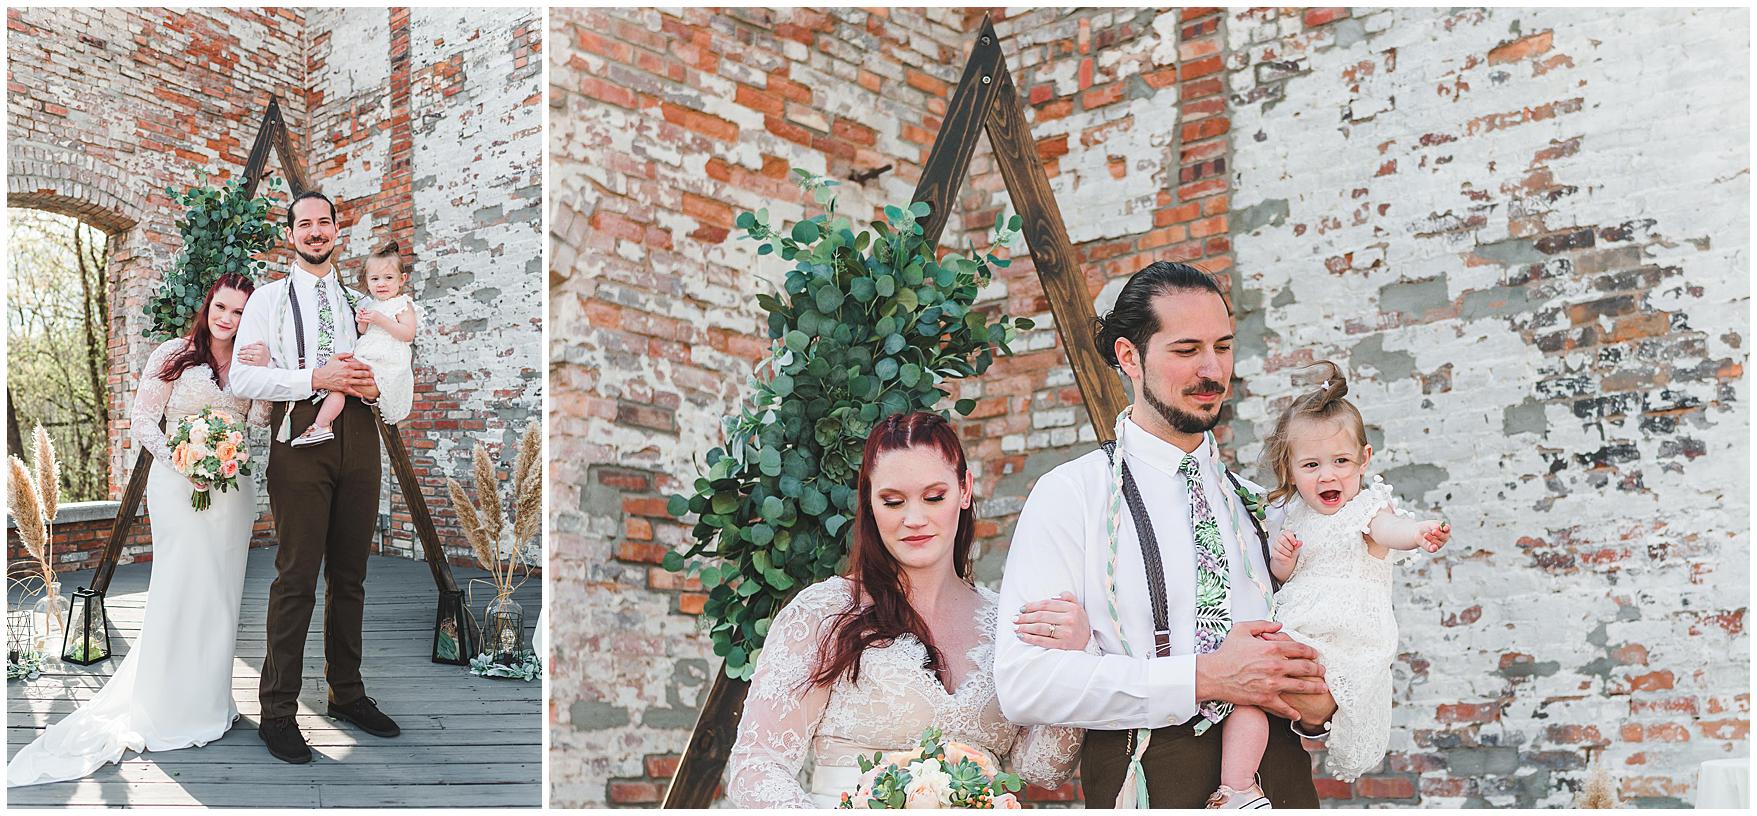 Bride, groom, and daughter take portraits together after the wedding ceremony at the Hackney Warehouse